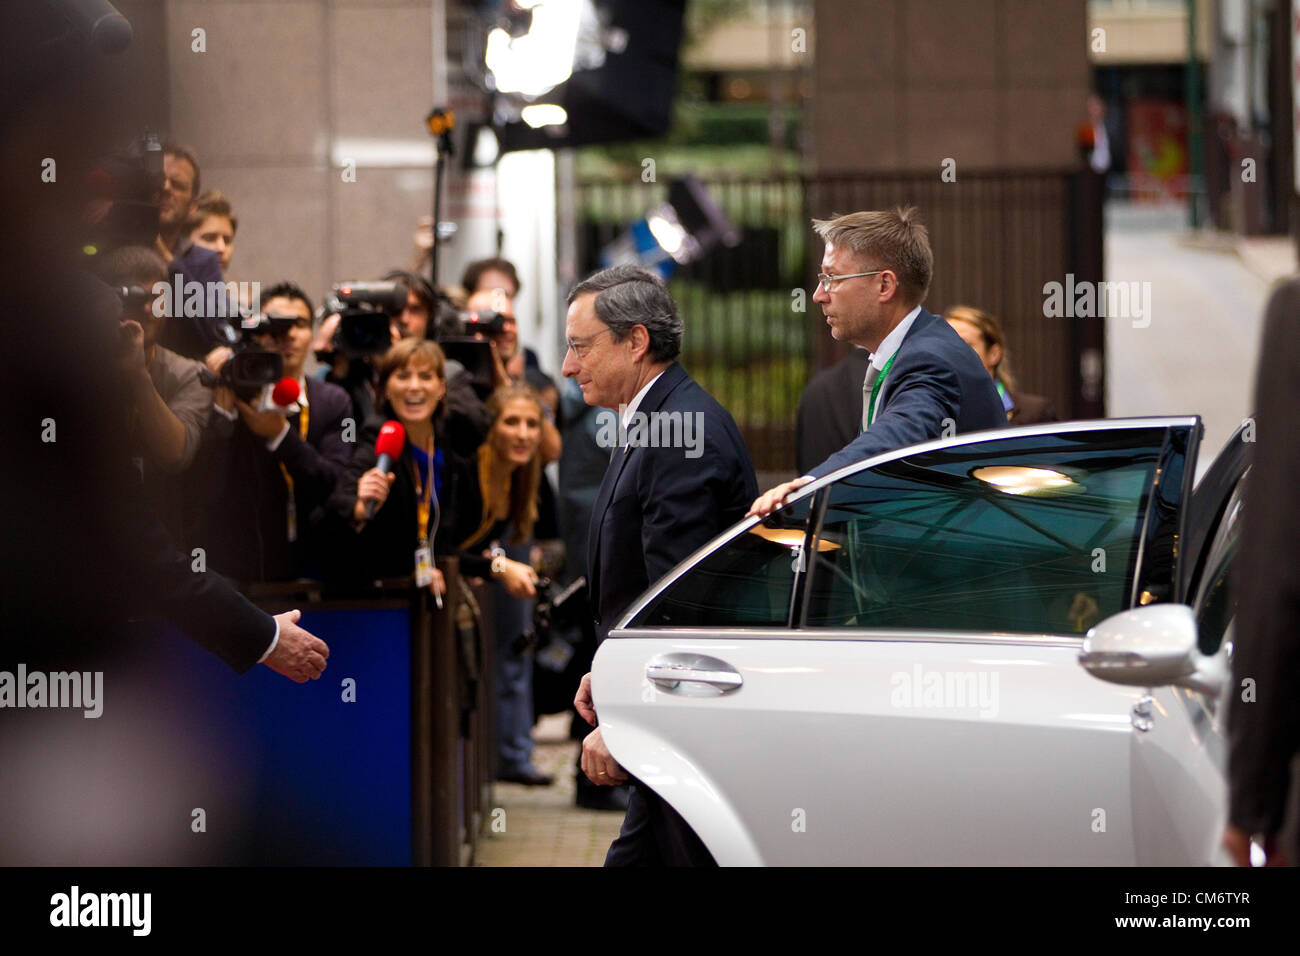 Mario Draghi, President of the European Central Bank arriving at the European Council meeting in Brussels, Justus Lipsius Building. Photo:Jeff Gilbert. 18.10.2012. Brussels, Belgium. Stock Photo